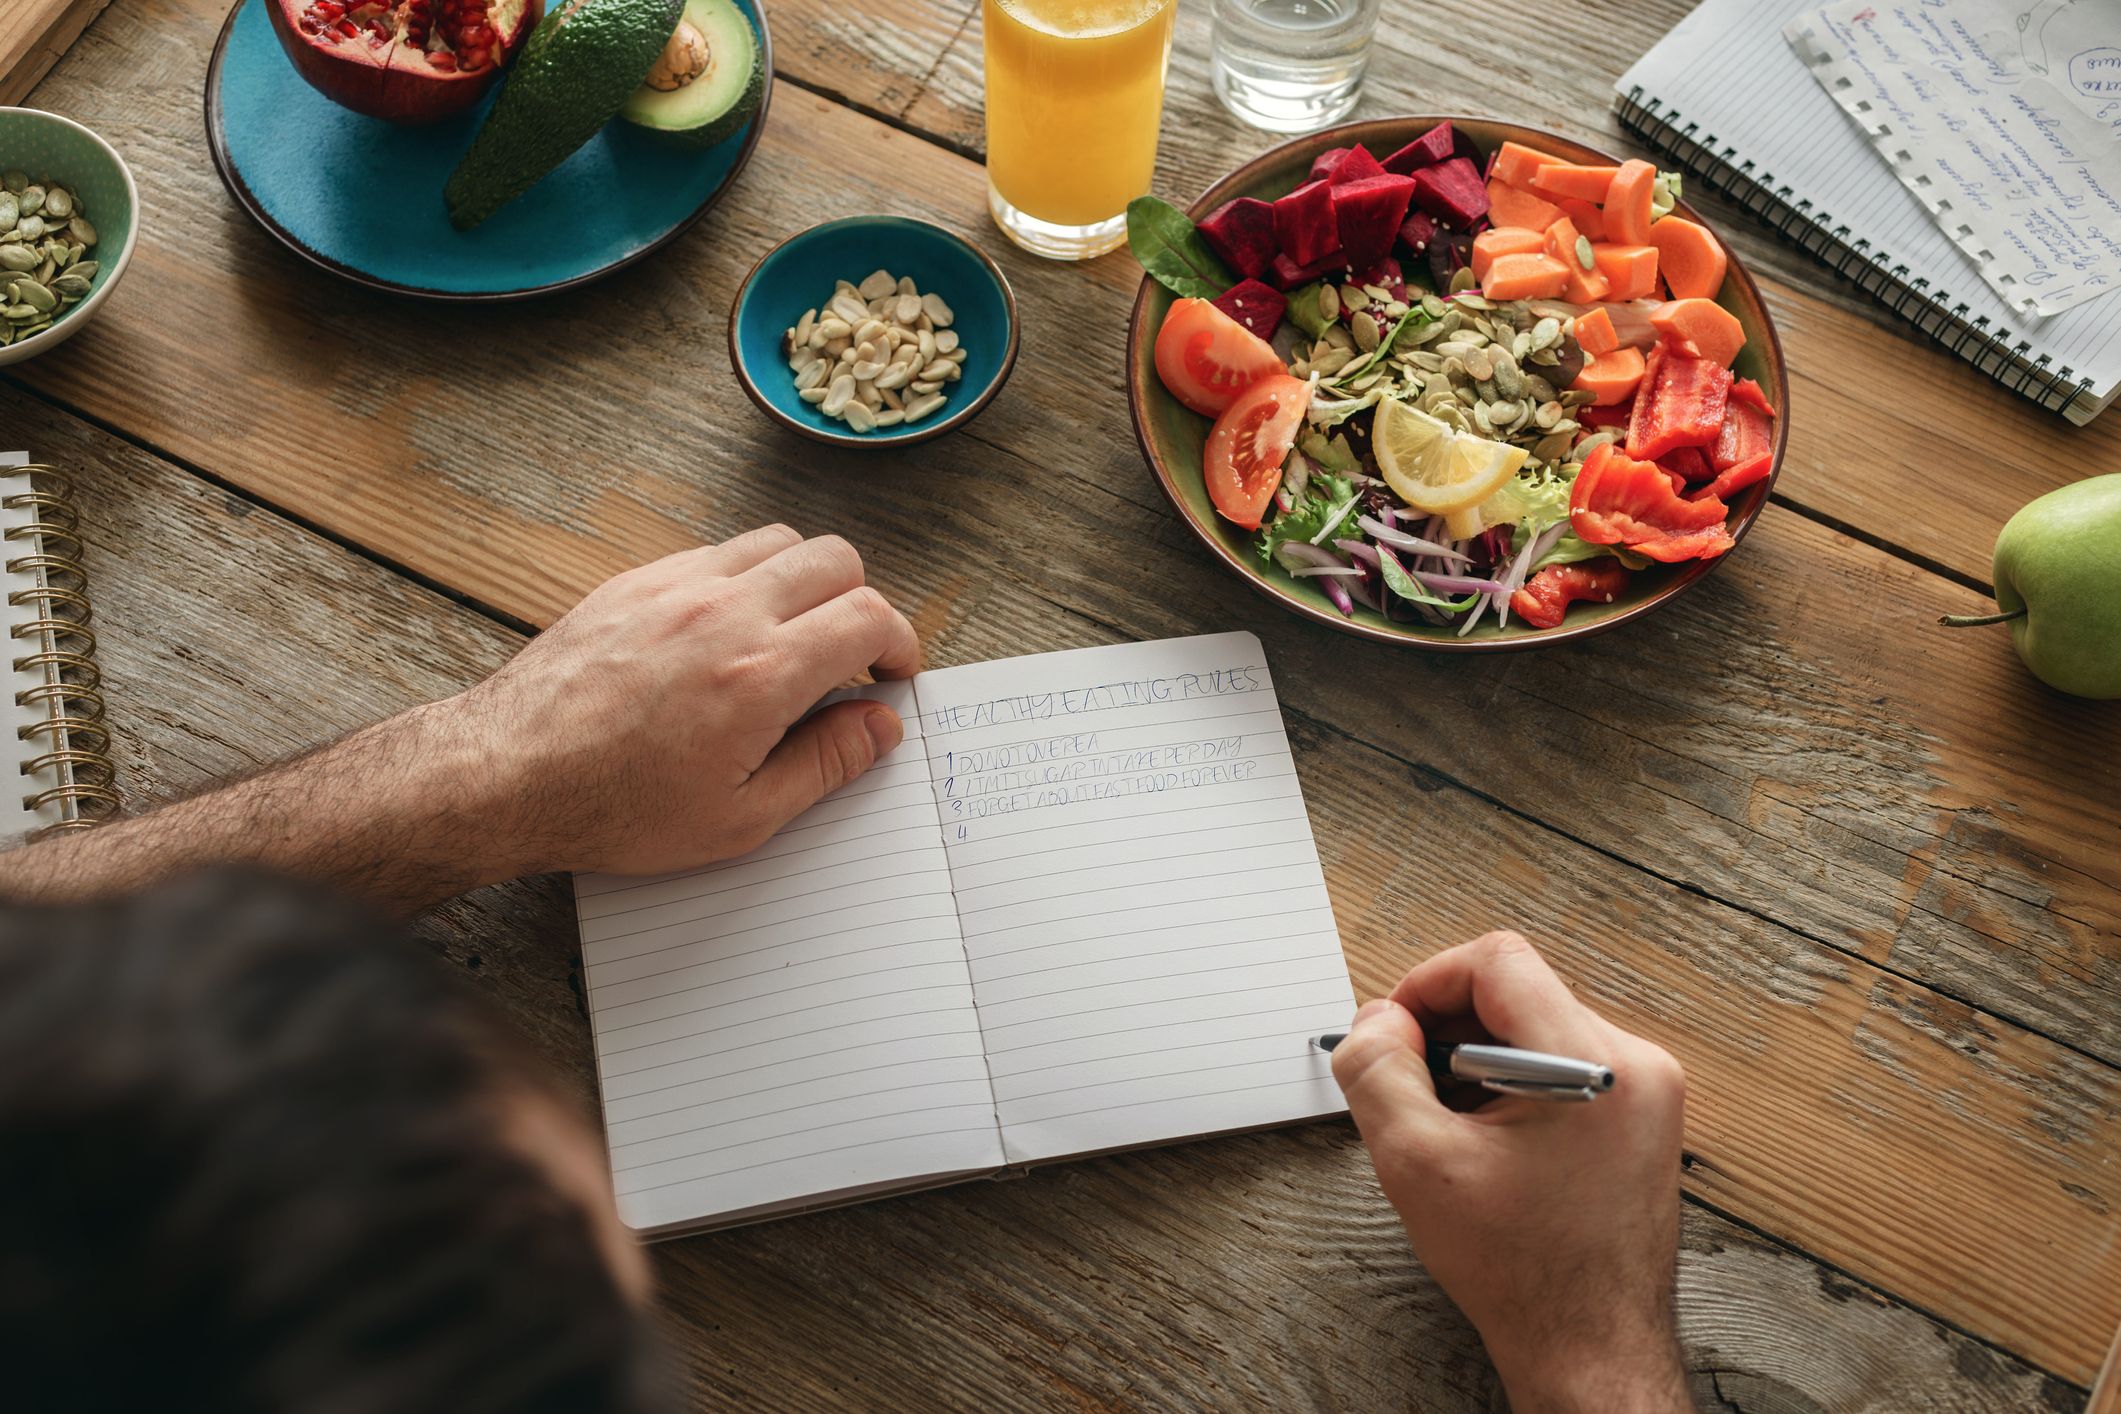 A man journals about &quot;health food rules&quot;, seated at a table filled with fruits and veggies.